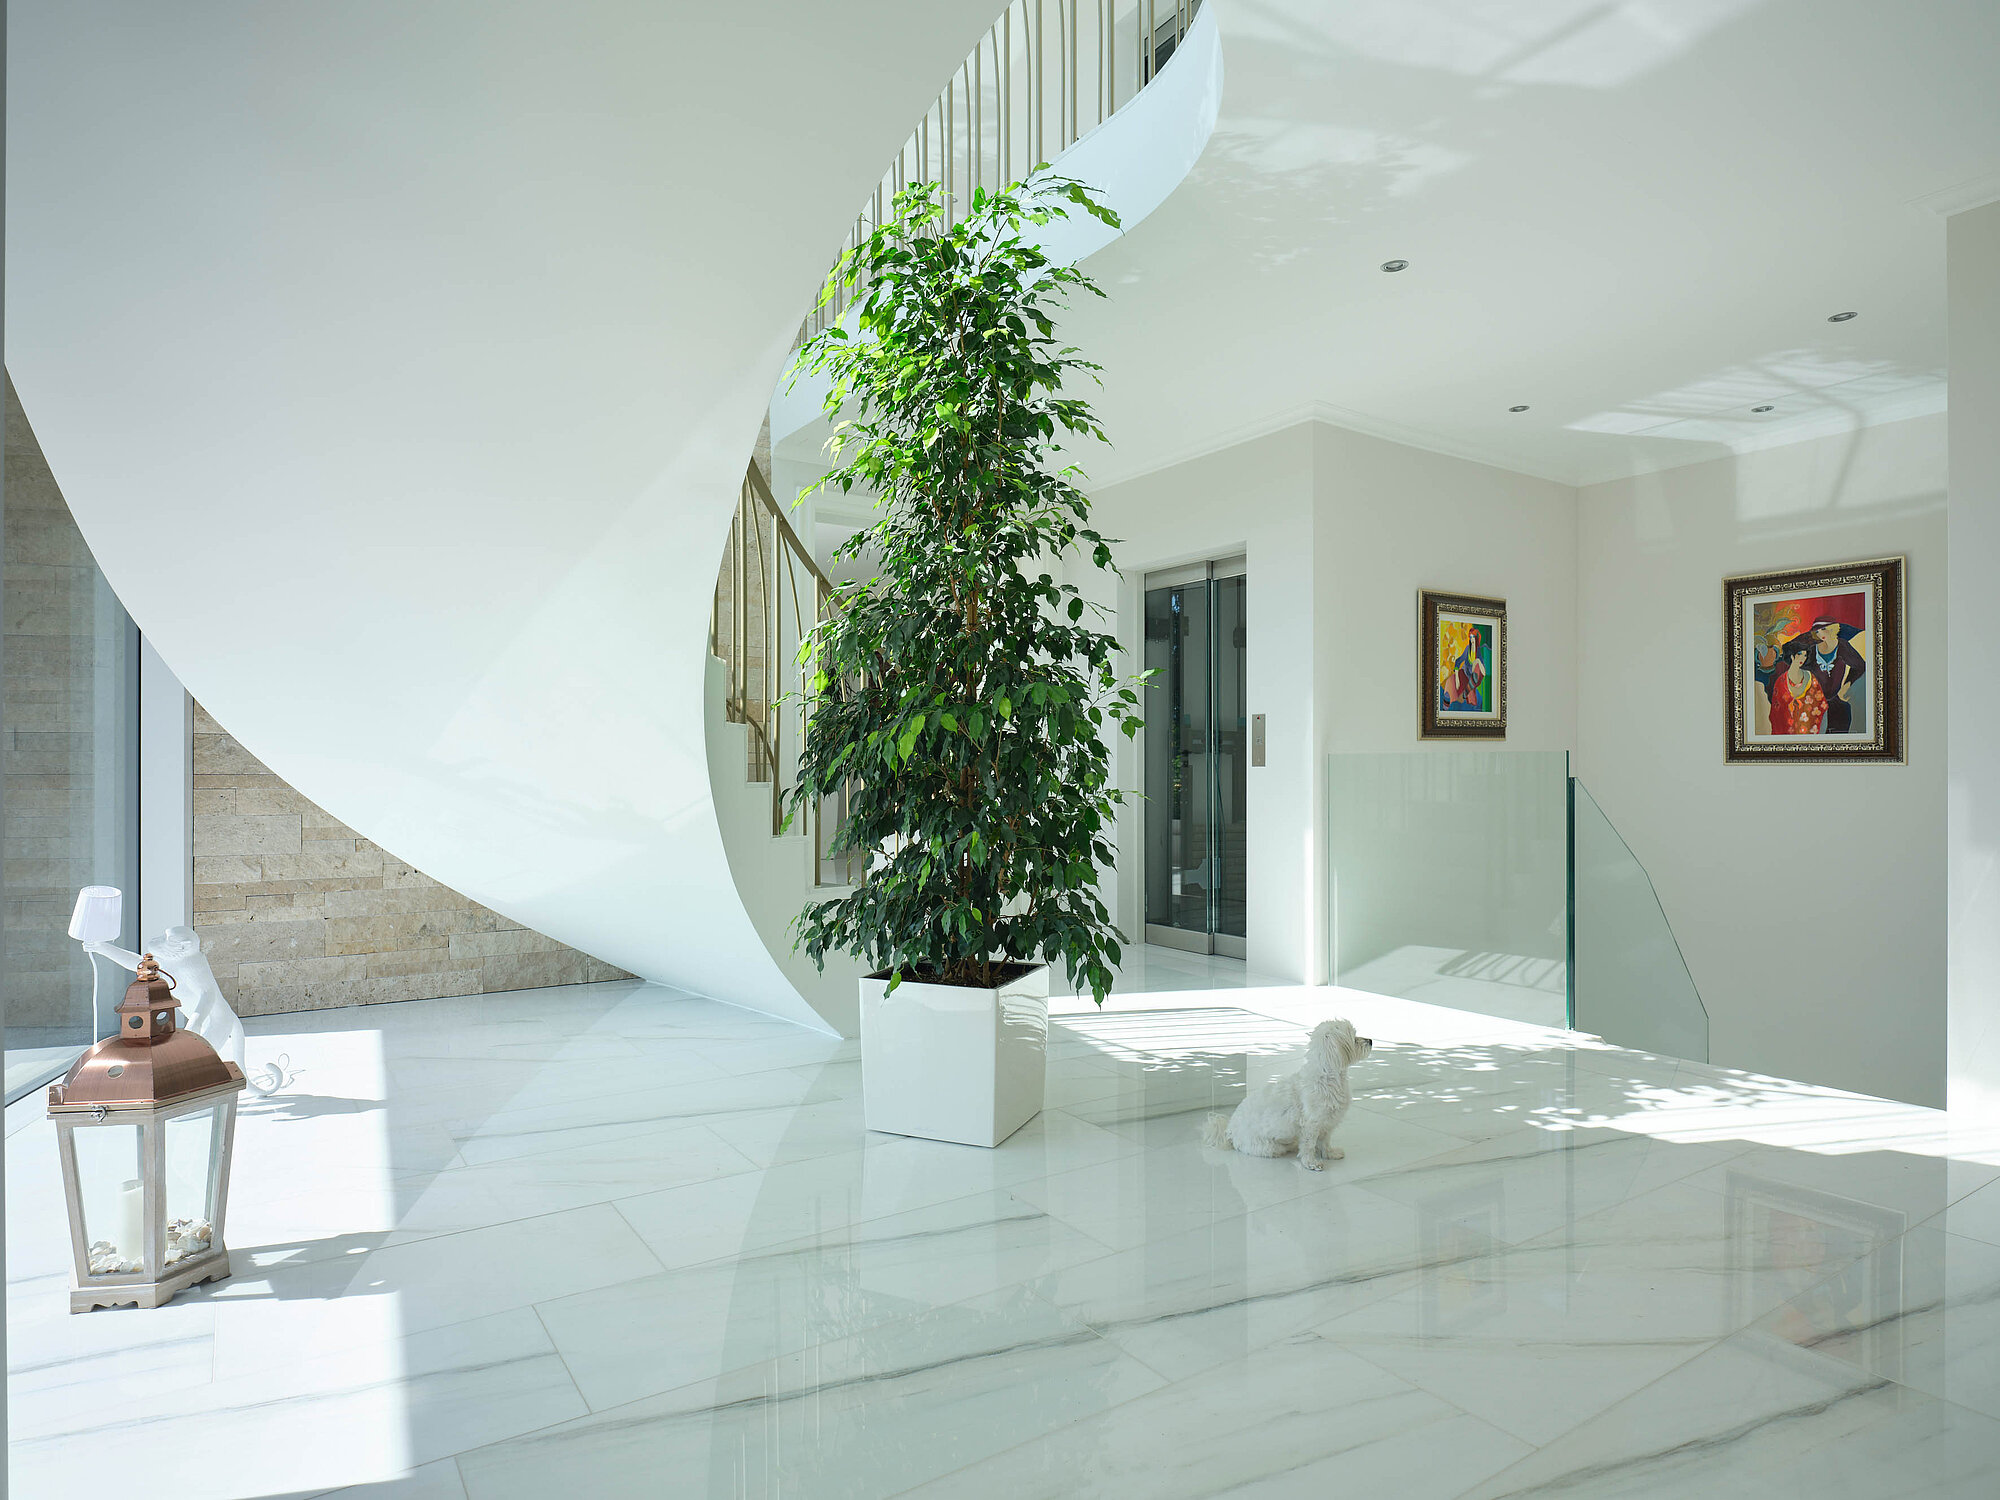 Interior view of the DOLCE VITA detached house, entrance area